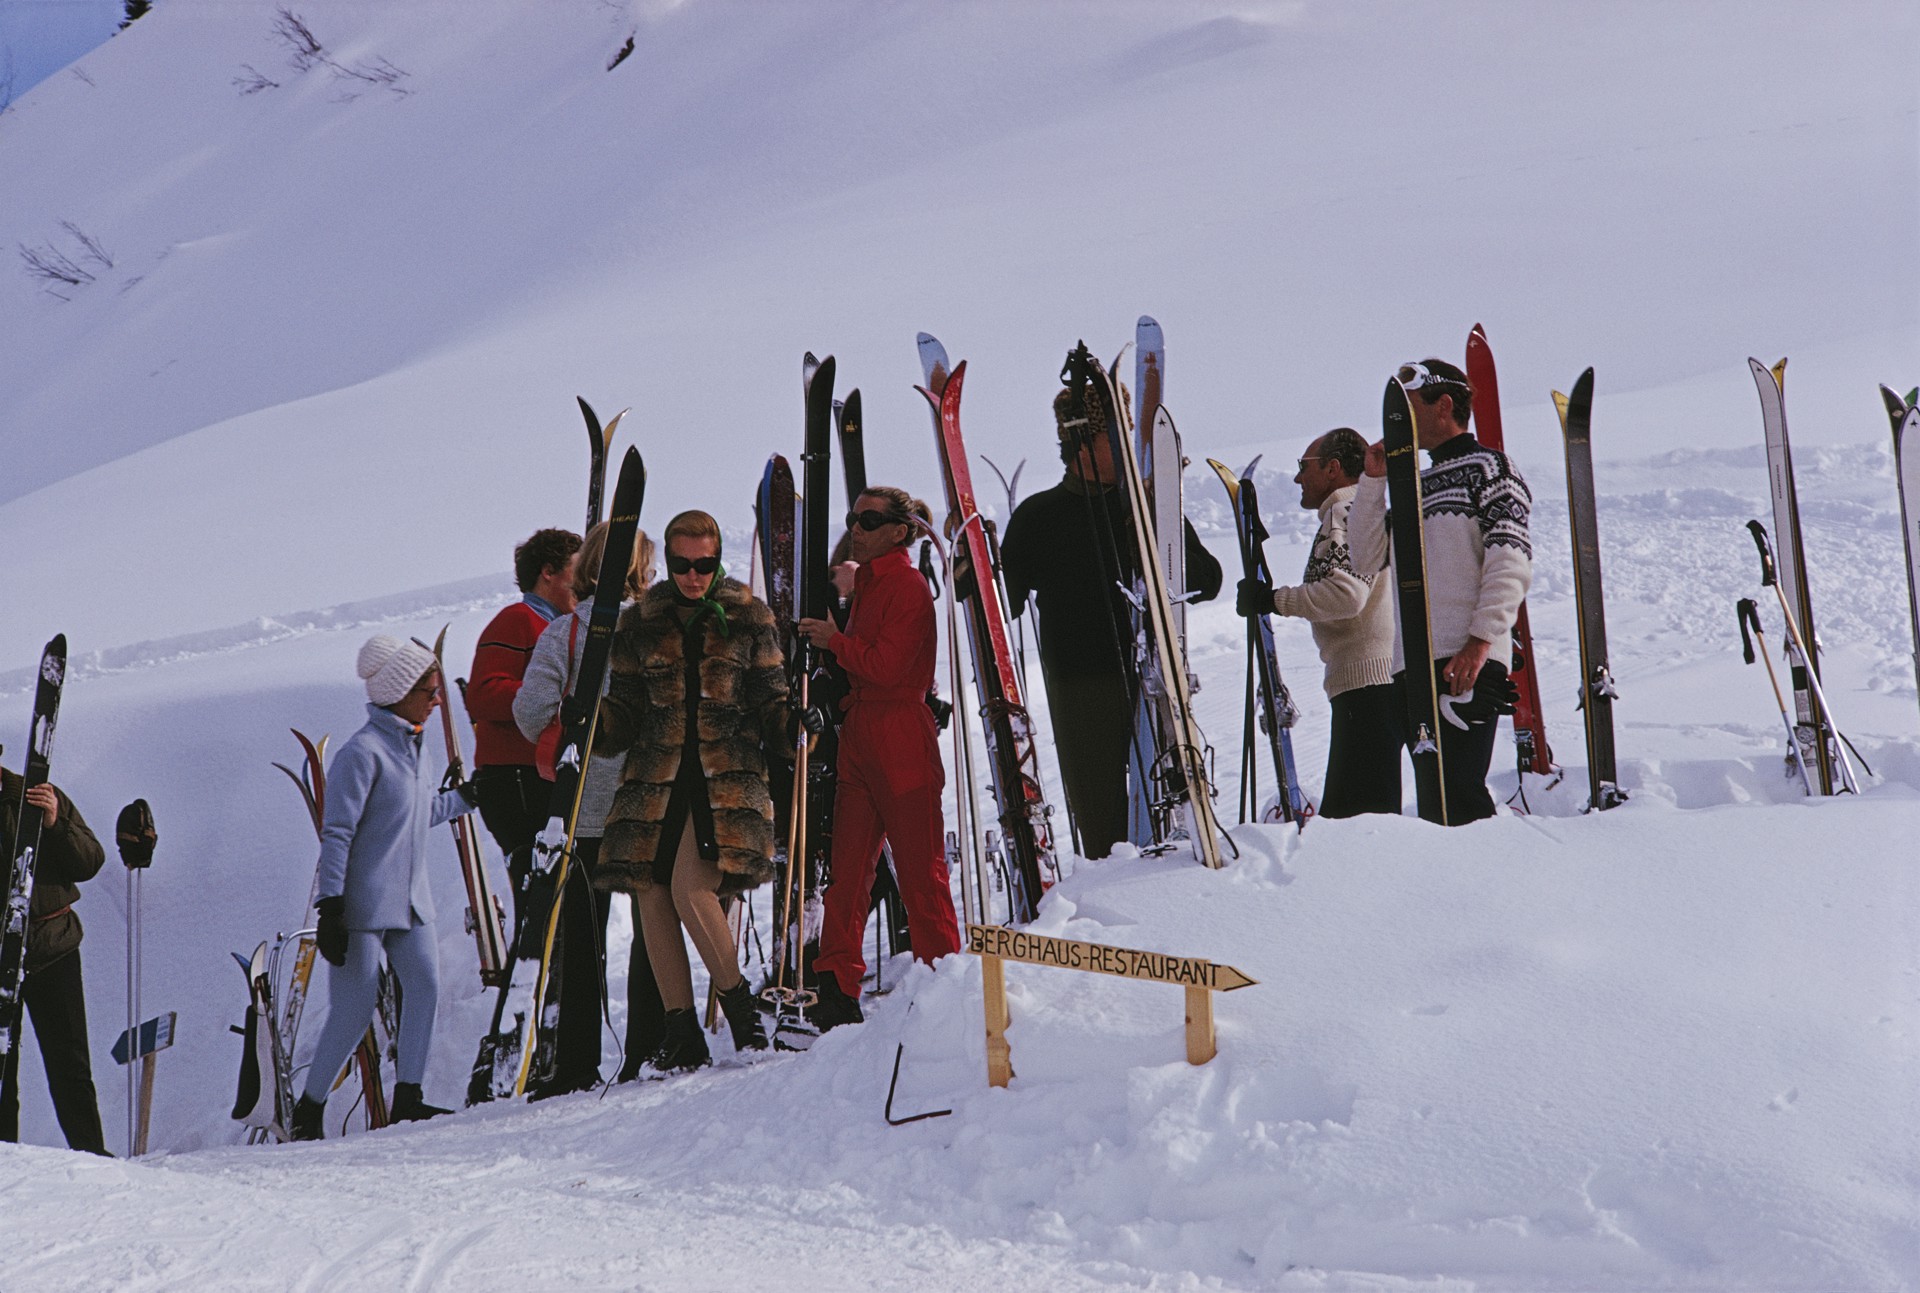 Skiers At Gstaad by Slim Aarons